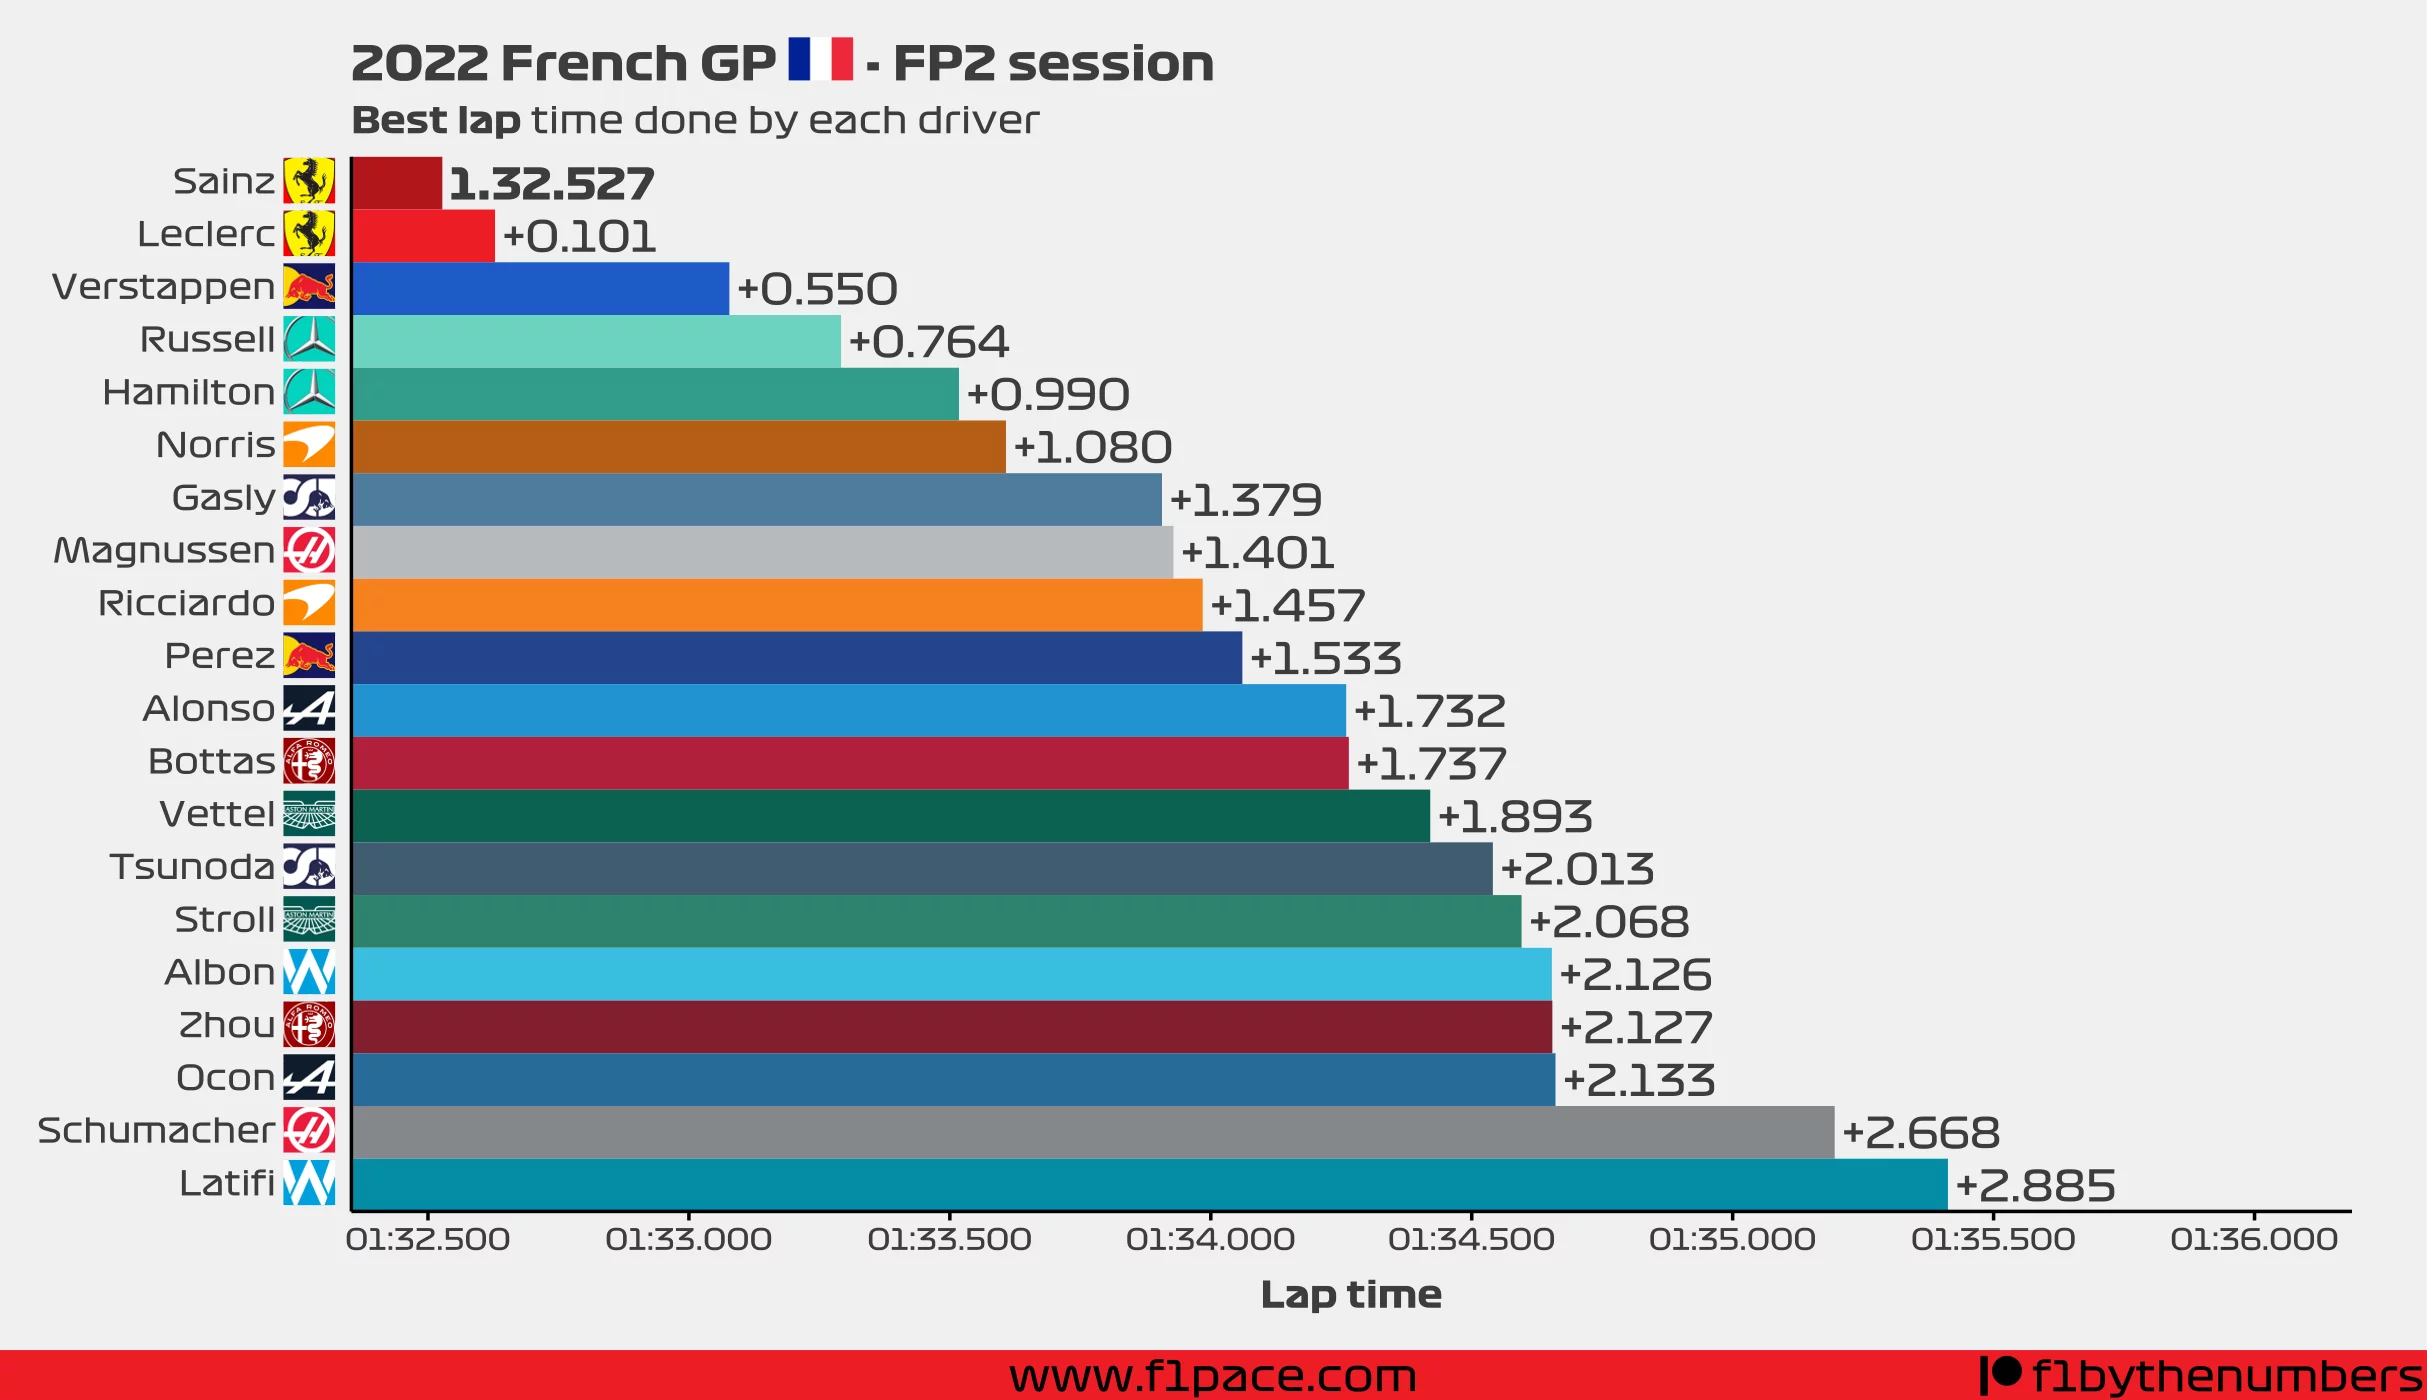 Best lap time for each driver